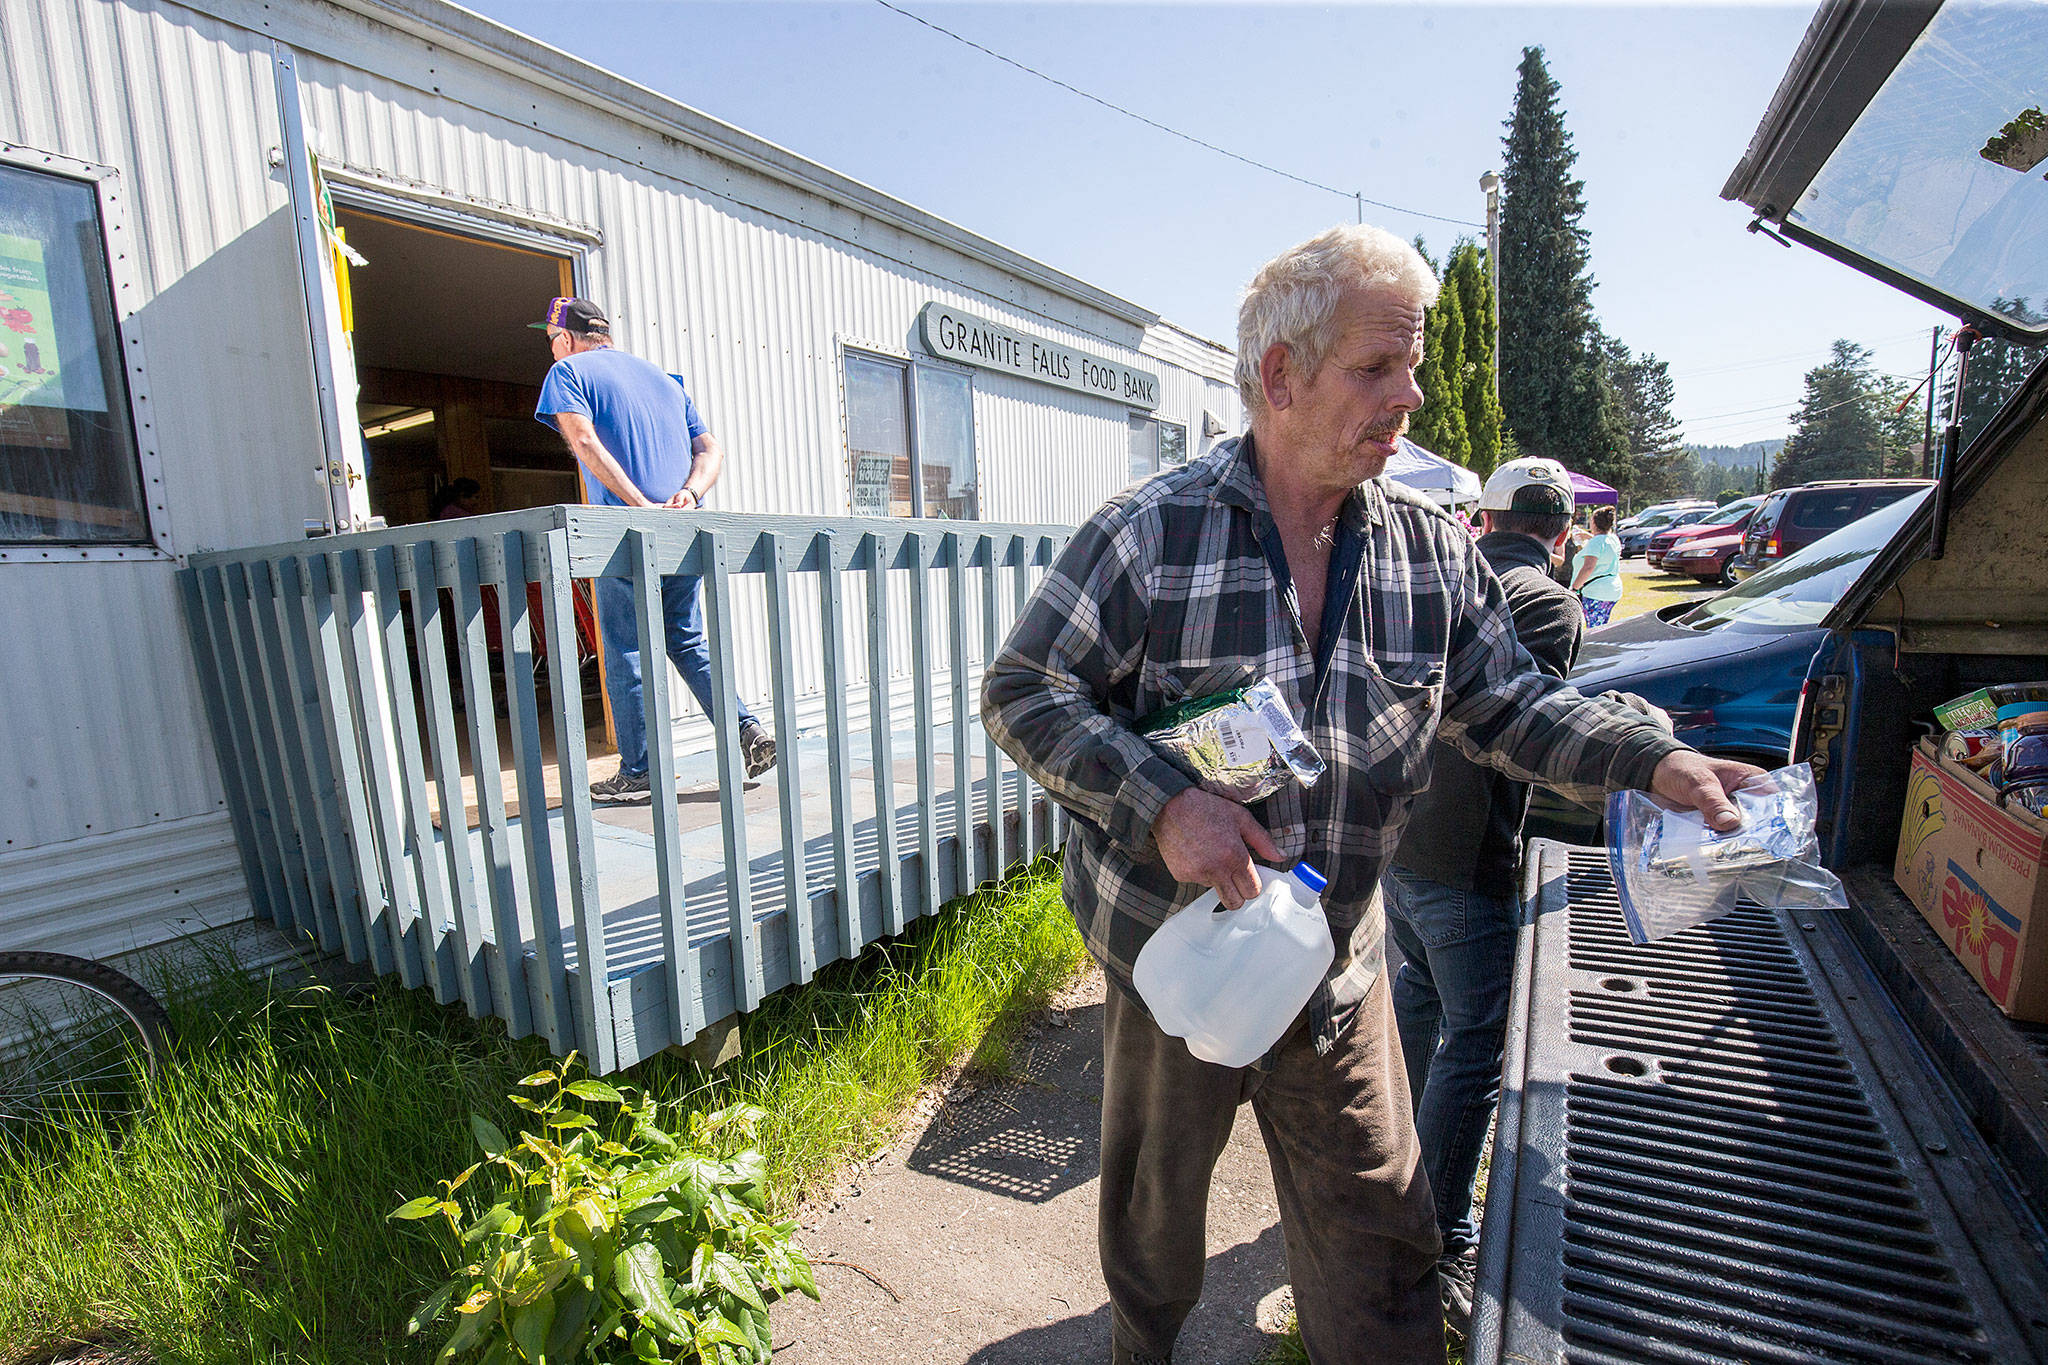 Carey Deeter puts groceries in his truck after leaving the Granite Falls Food Bank, a white metal-sided trailer on the corner of S. Granite and Union Street, on its final food distribution day on Wednesday in Granite Falls. The food bank will be moving from the site that has housed the service for 40 years. (Andy Bronson / The Herald)